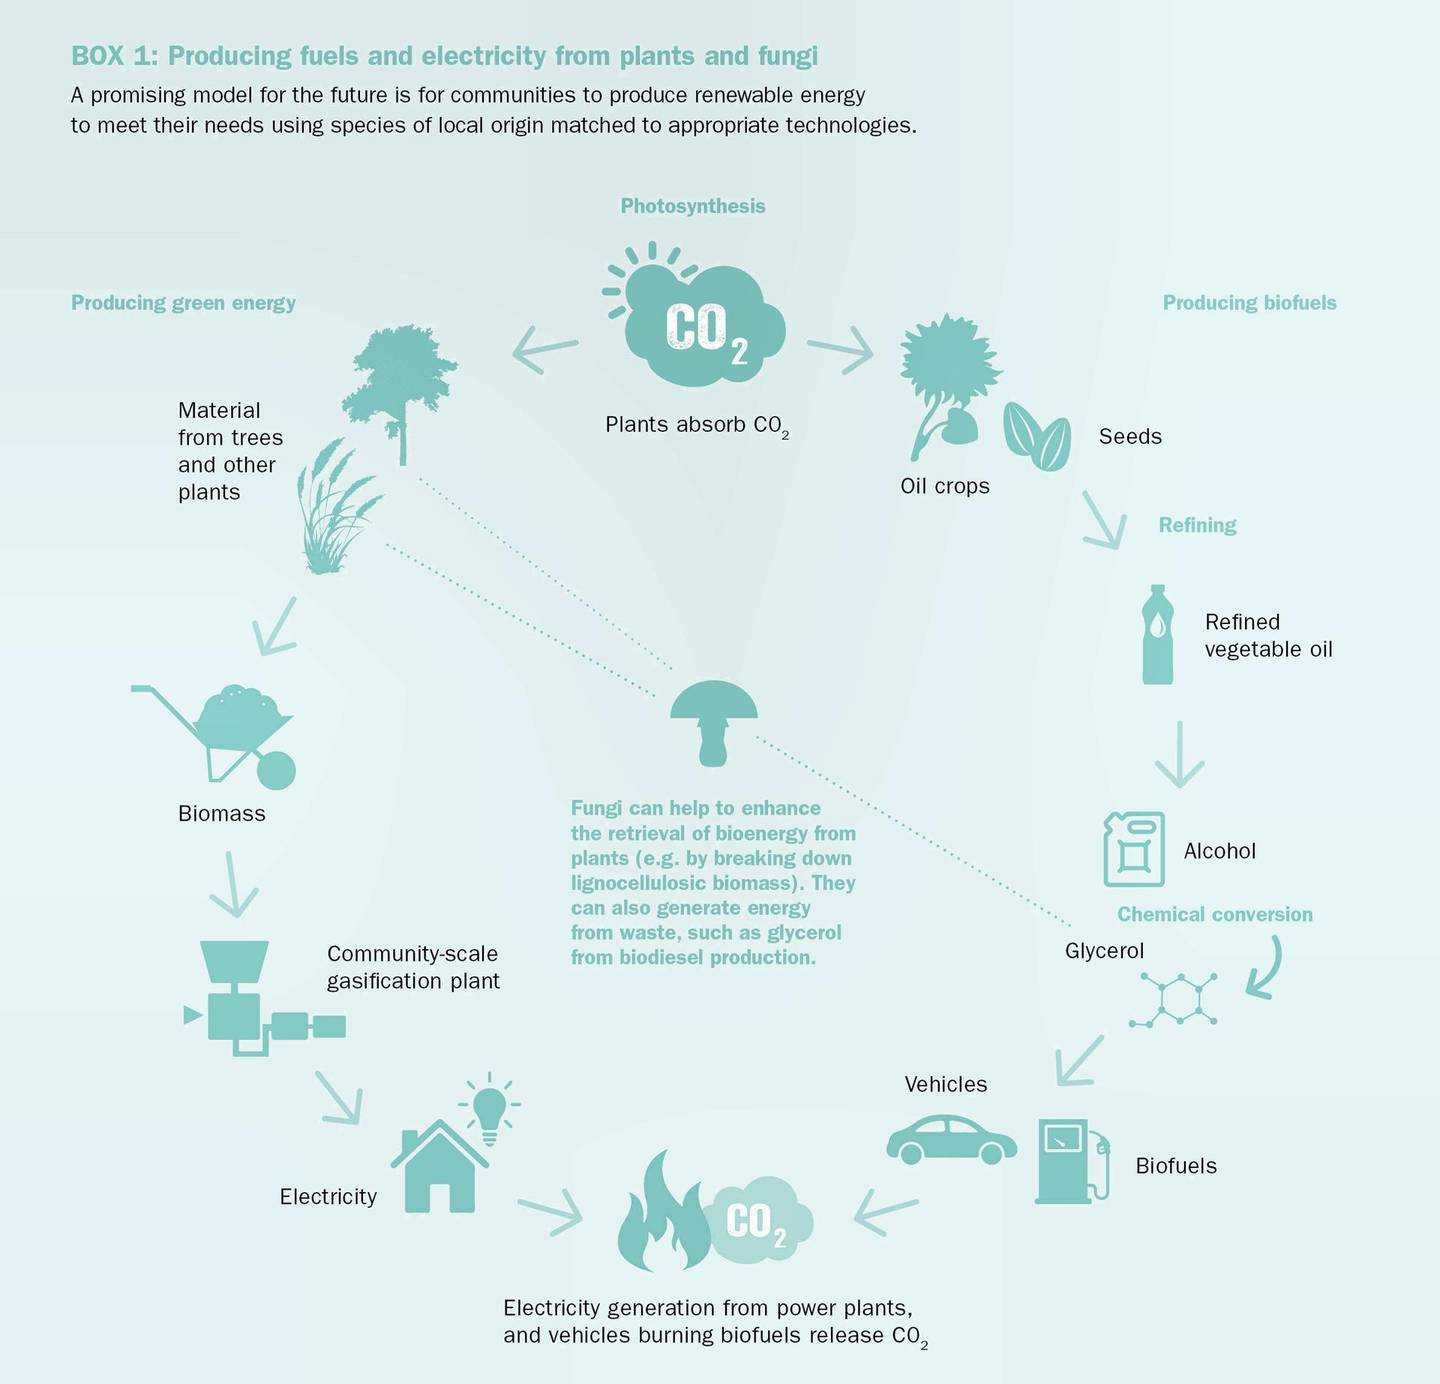 A graphic displaying how plants and fungi can help produce bioenergy.